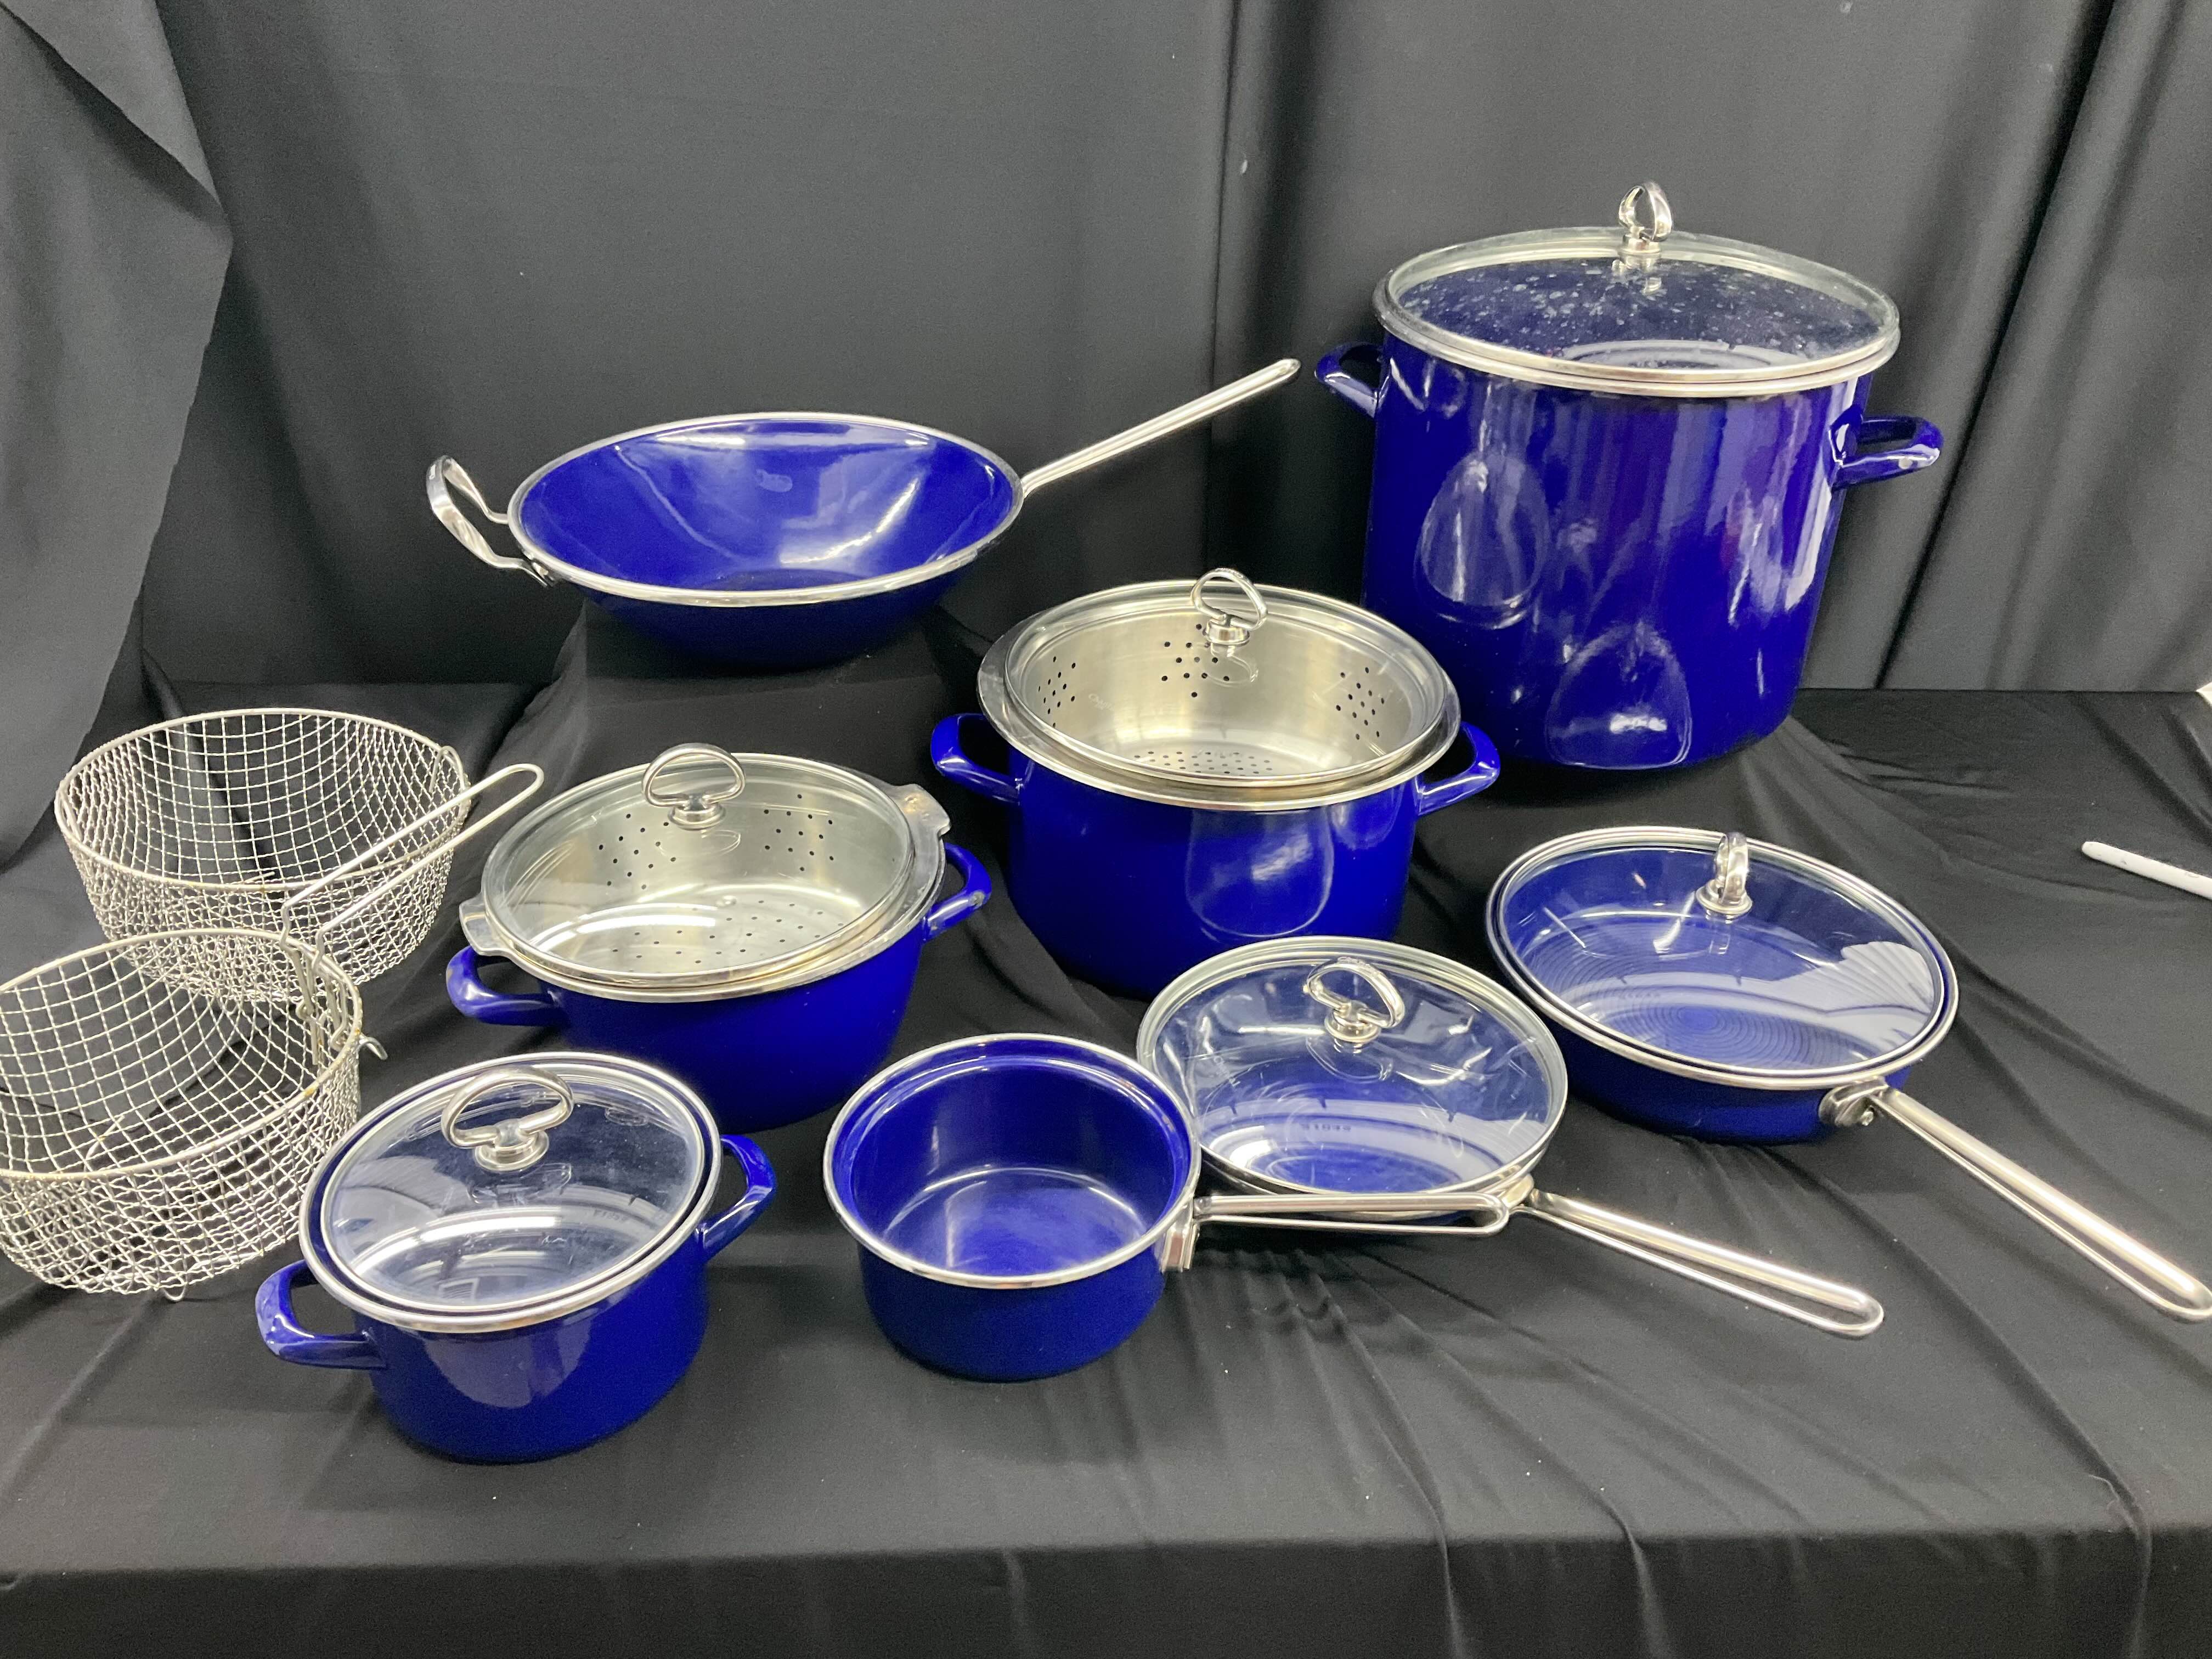 Lot 60 - Chantal Cookware and More